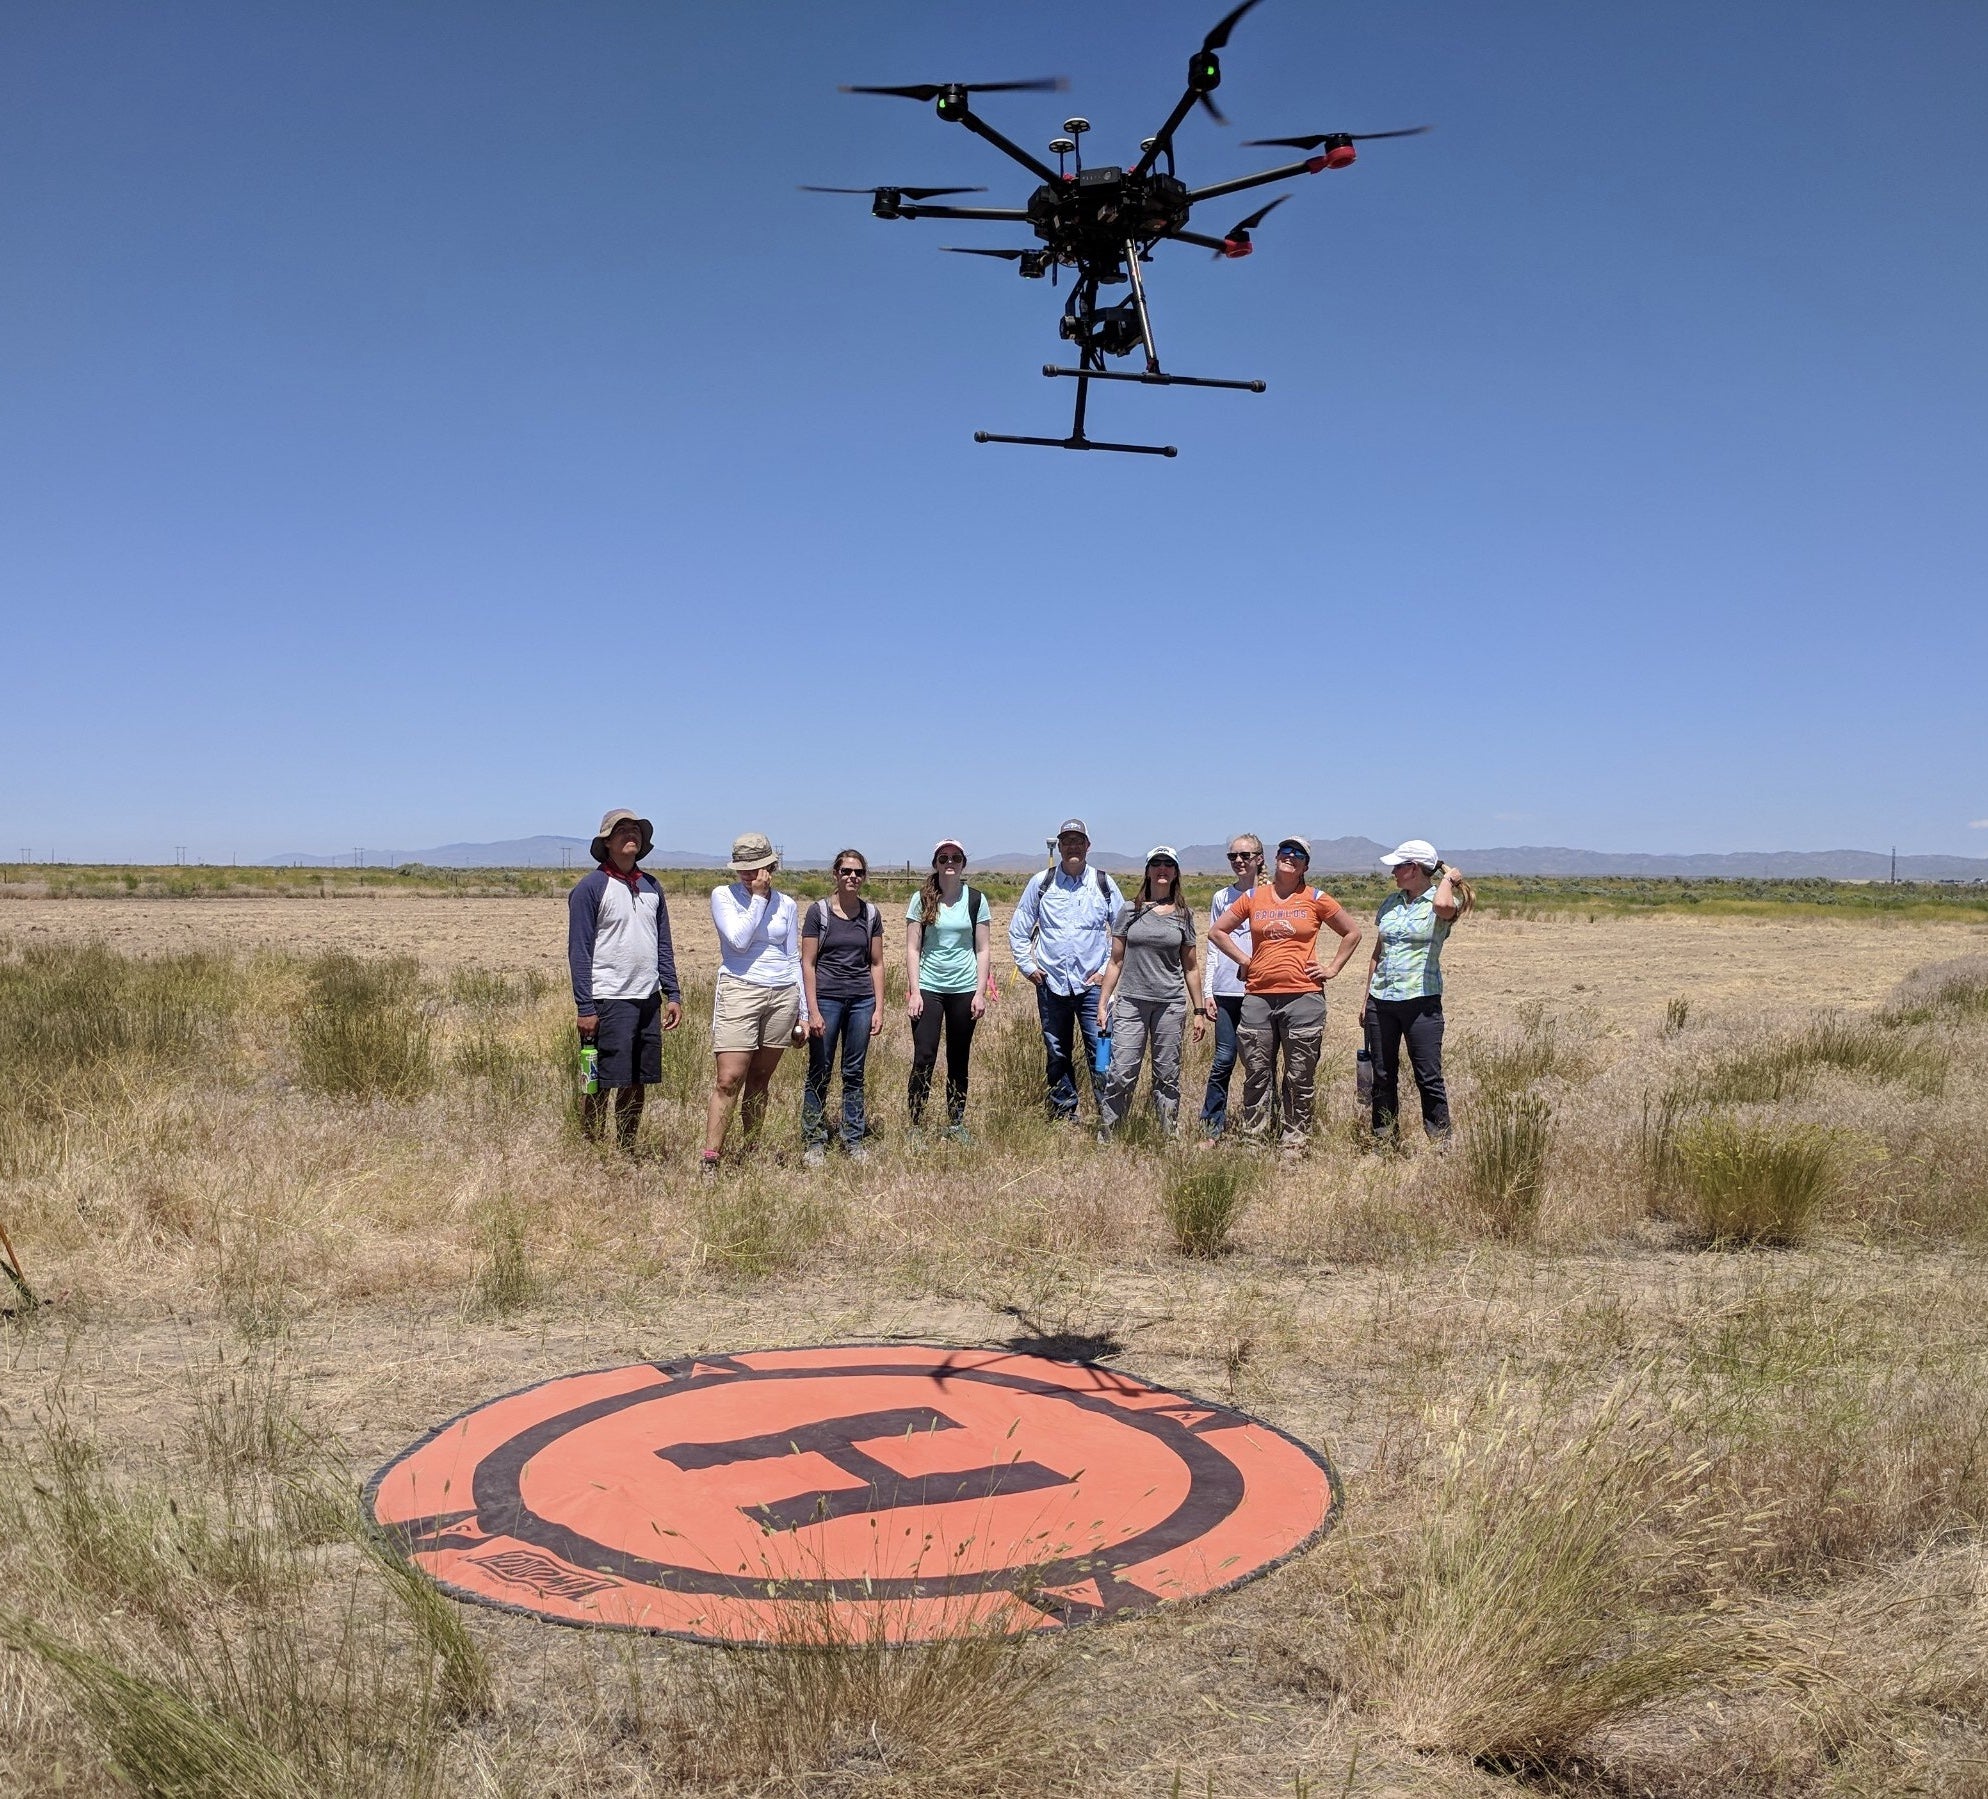 Group of people in rangeland watch drone ascend